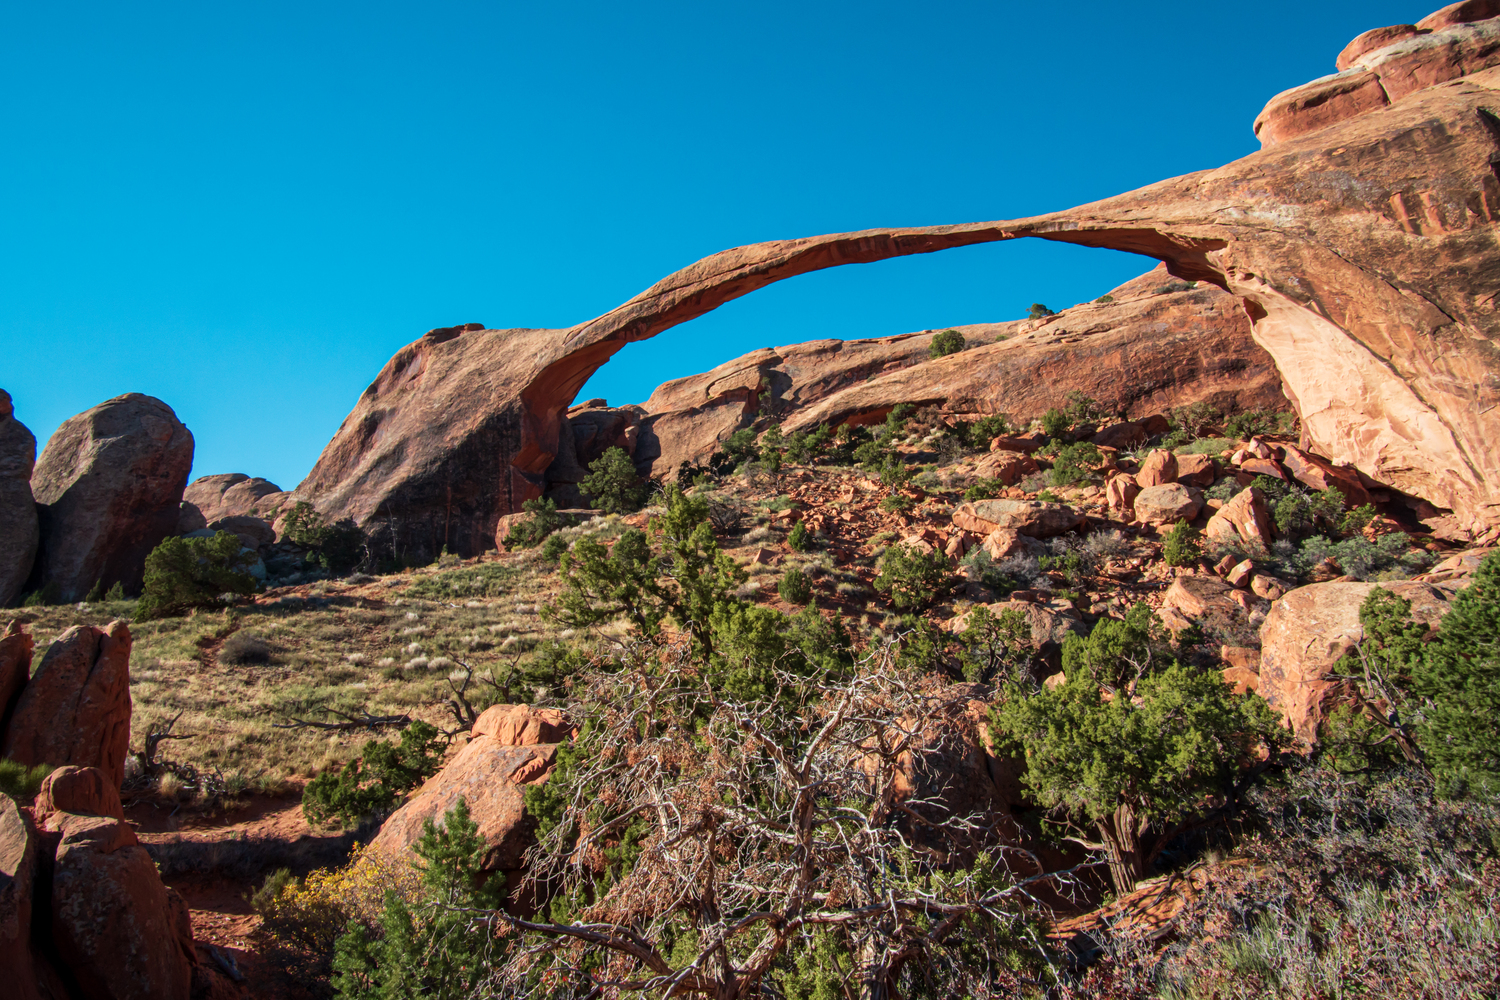 Arches Solo Hikes: 5 Trails That Are Perfect for Solo Hiking 